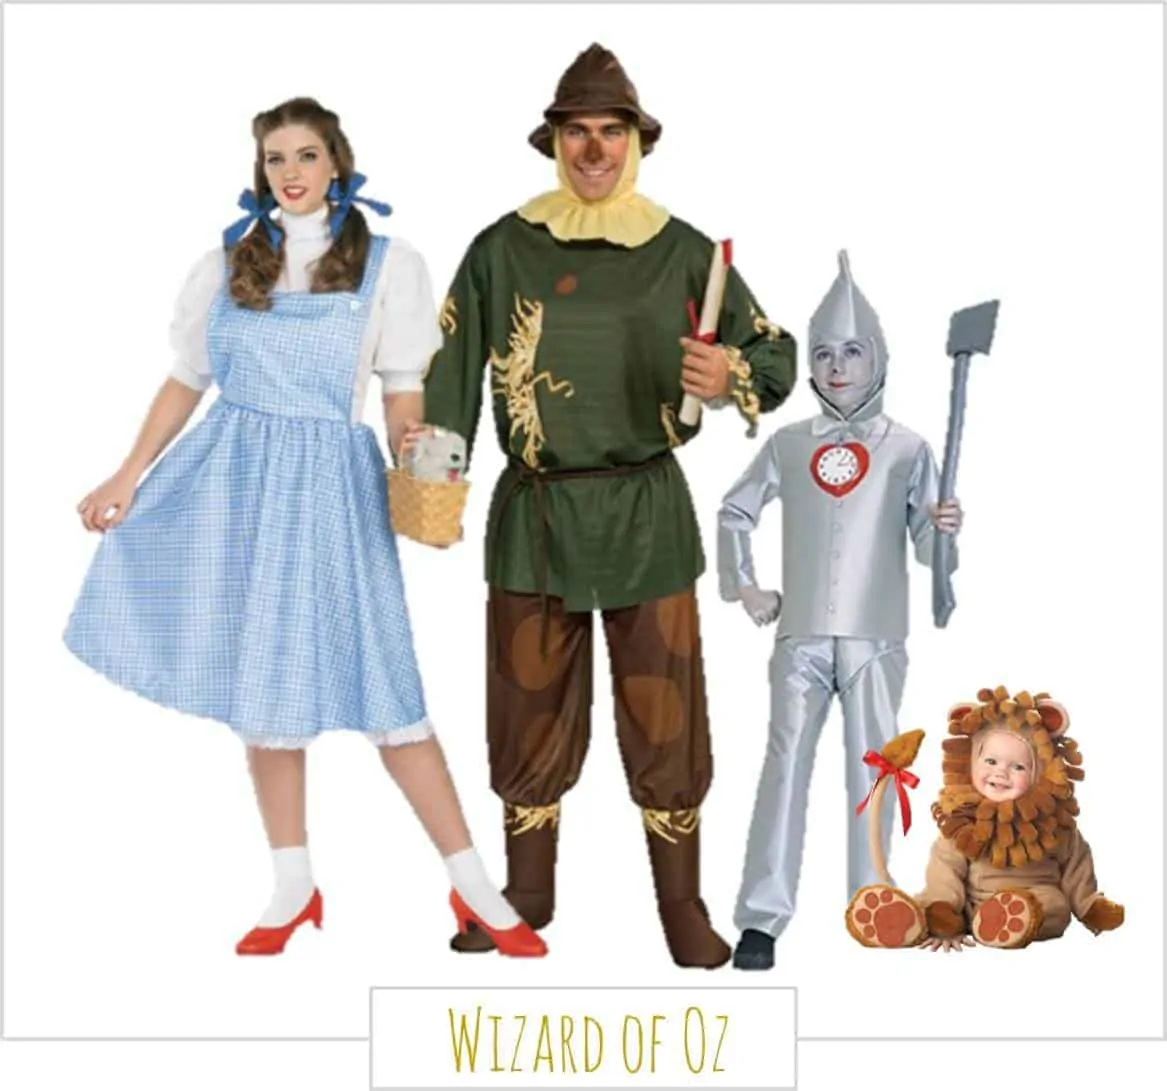 The Wizard of Oz,  Halloween Costumes for the Whole Family